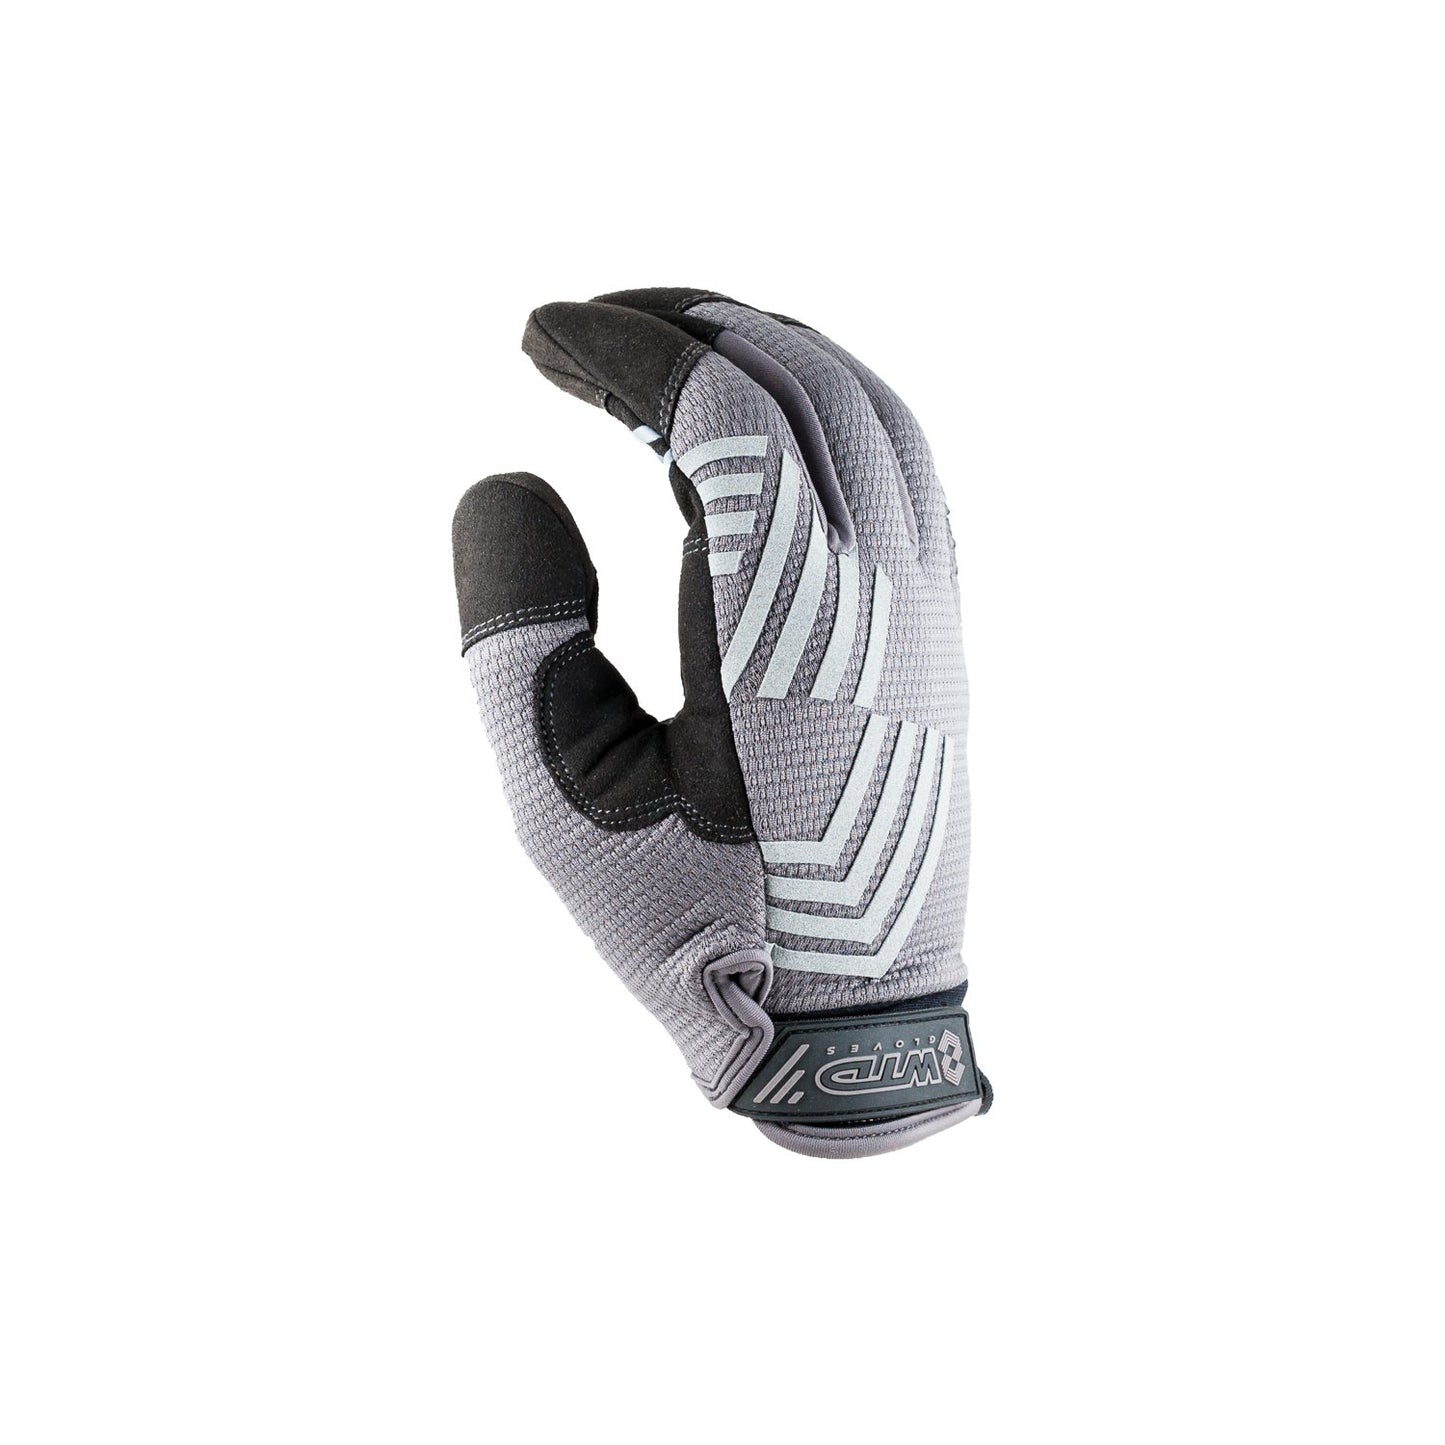 WTD Enduro Tech Smartglove with touchscreen technology and reflective trims